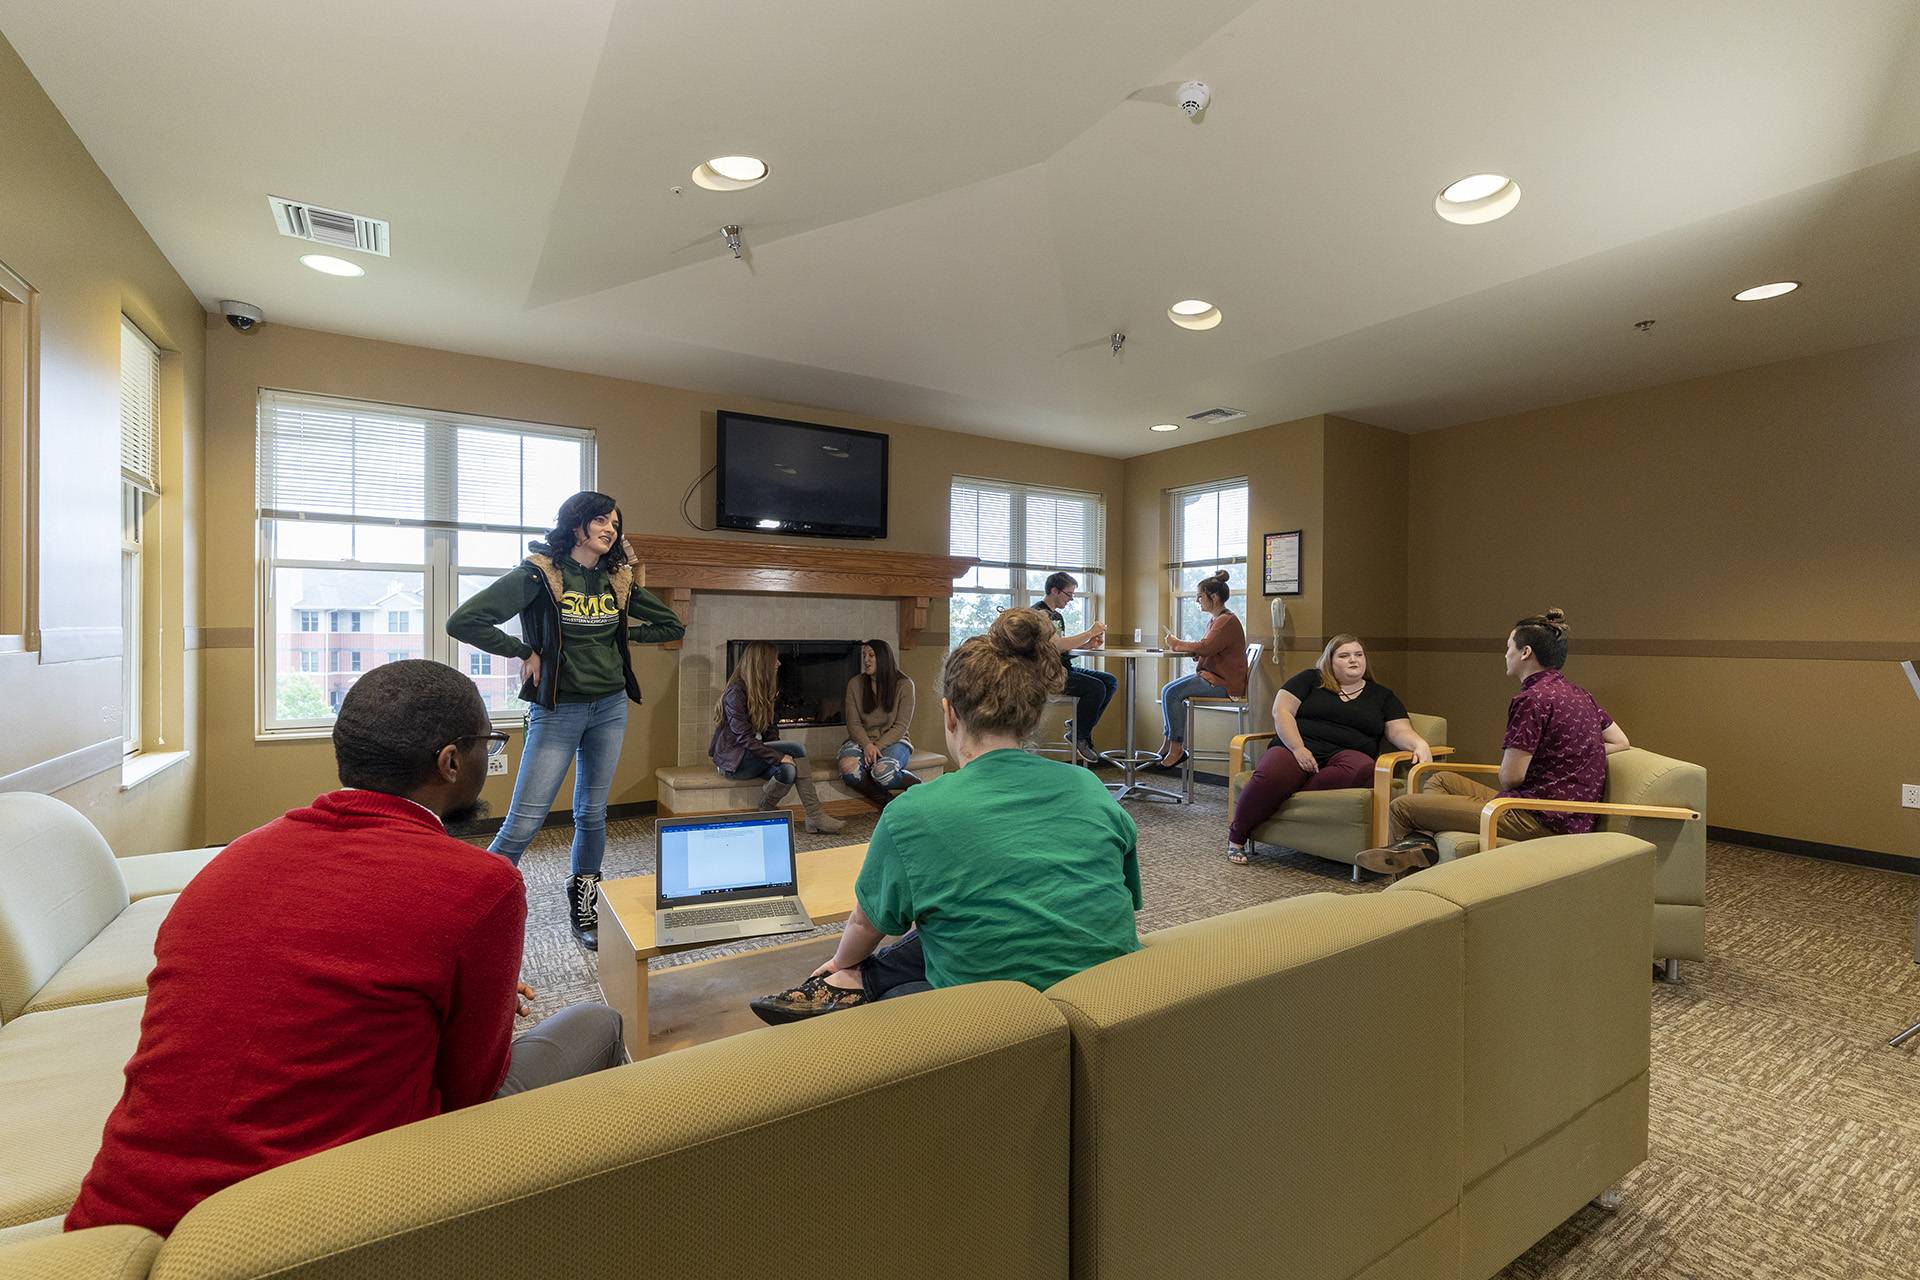 Students talking and watching TV in the Residence Halls common area